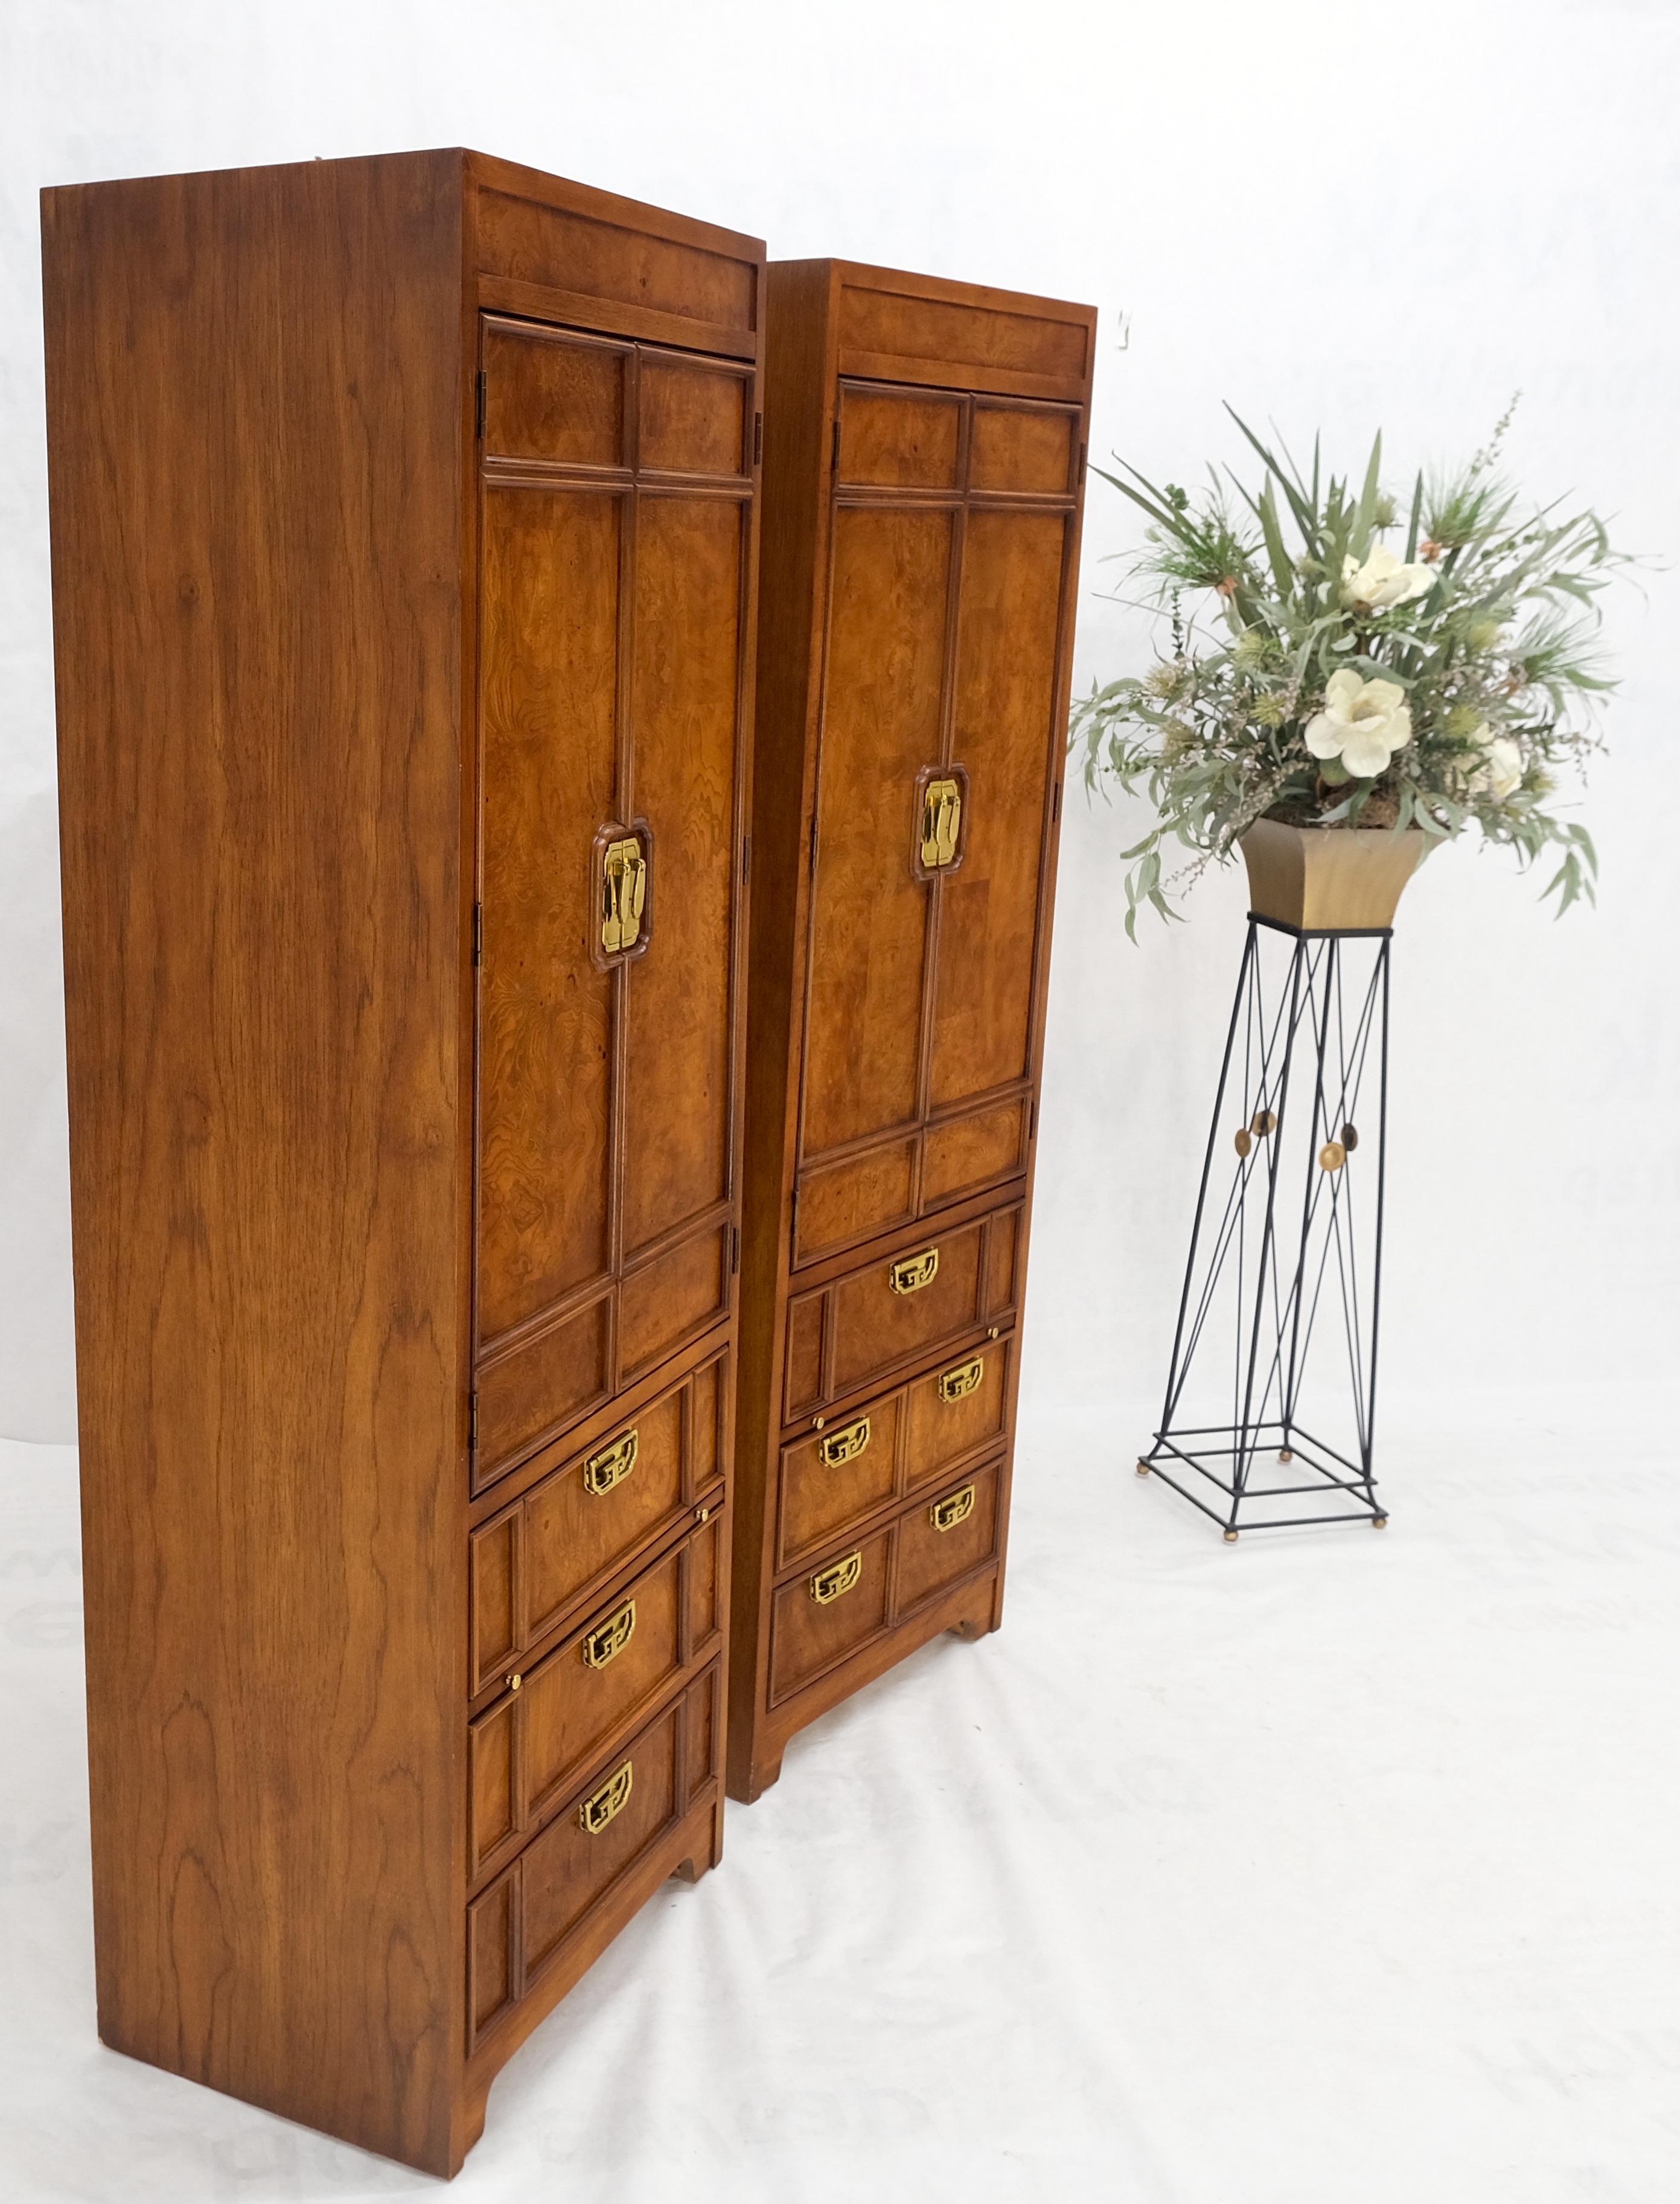 Brass Thomasville Tall Tower Shape Highboy Dressers W/ Drawer Compartment Burl Wood 